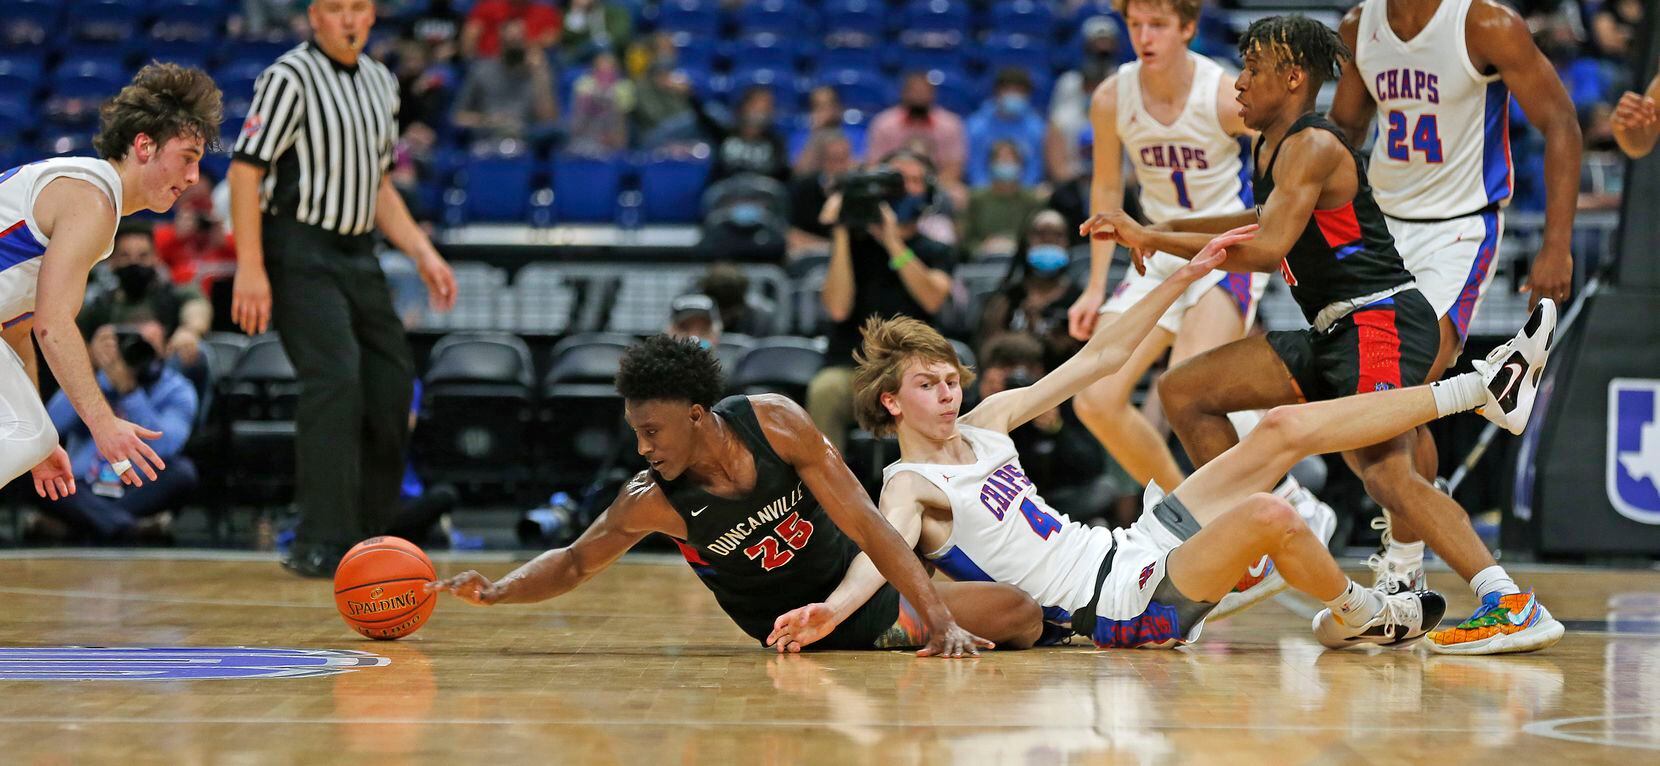 ‘We’re built for this’ Duncanville wins second straight 6A boys